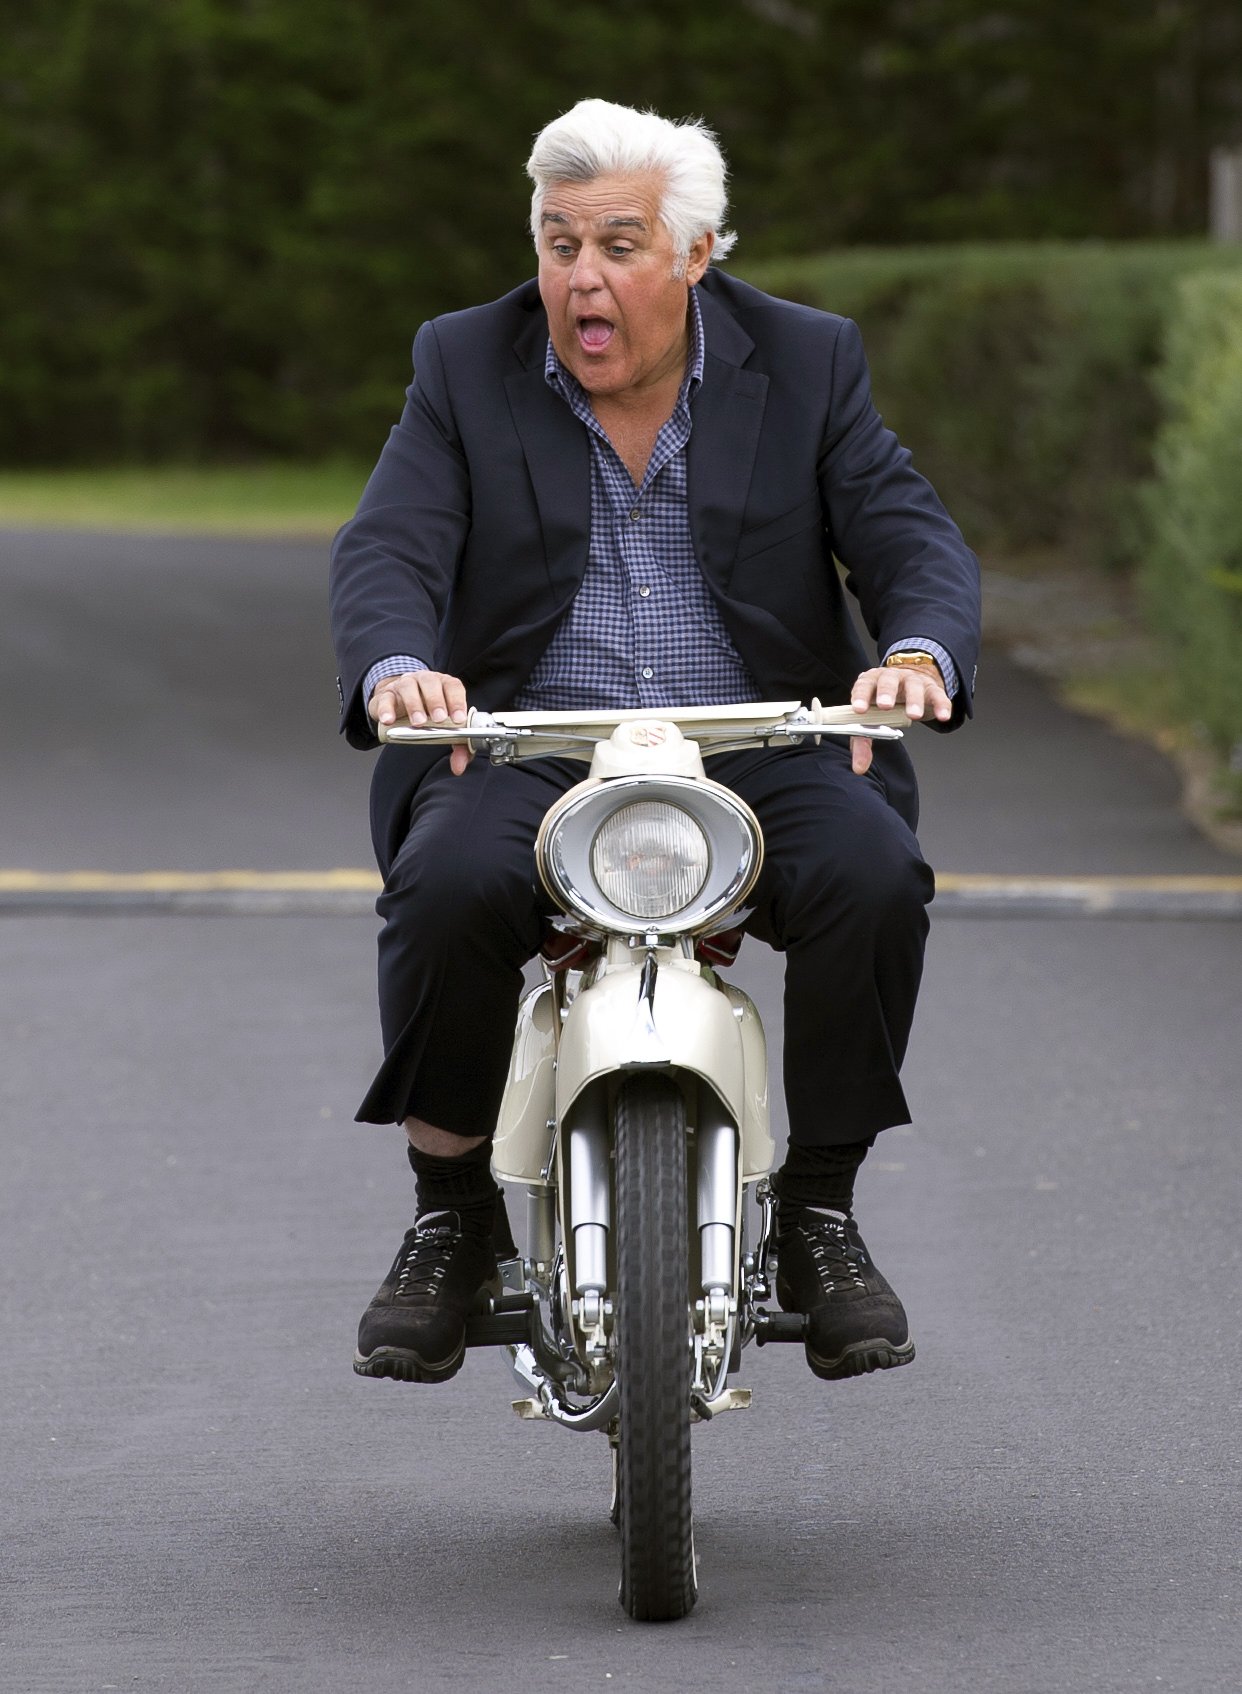 Jay Leno in Pebble Beach, California on August 17, 2014 | Source: Getty Images